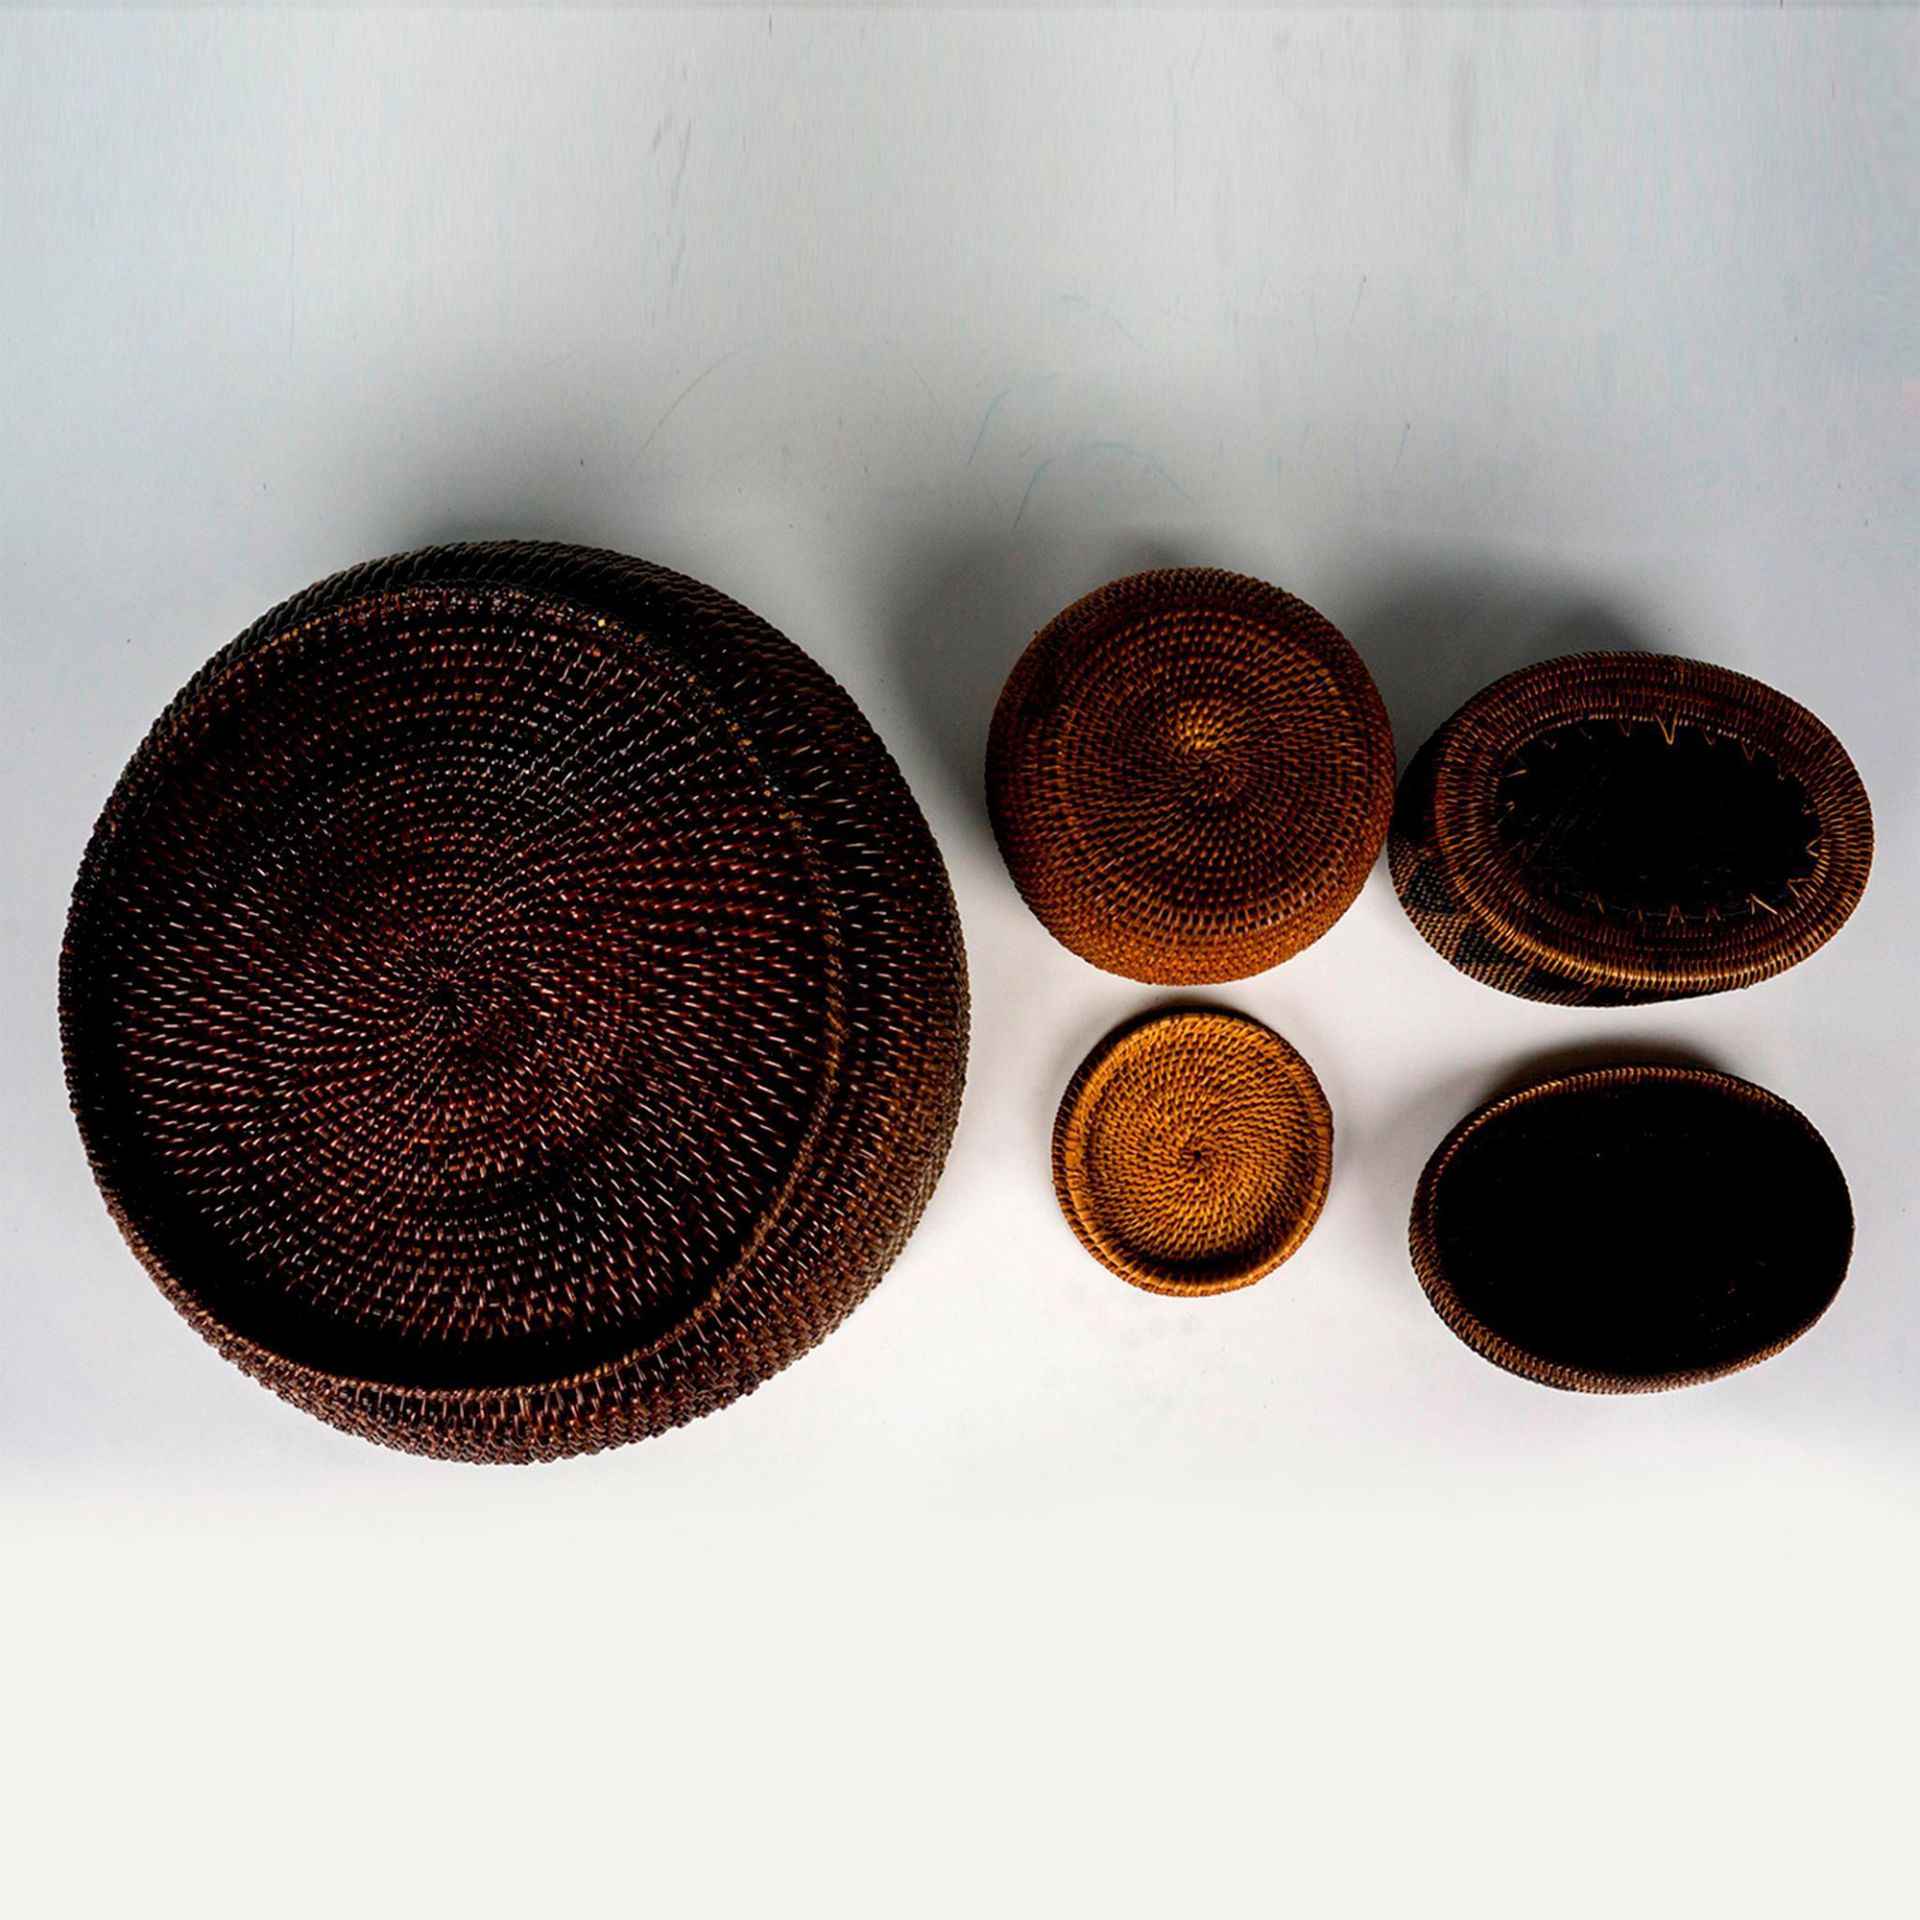 3pc Lidded Woven Rattan Baskets - Image 3 of 3